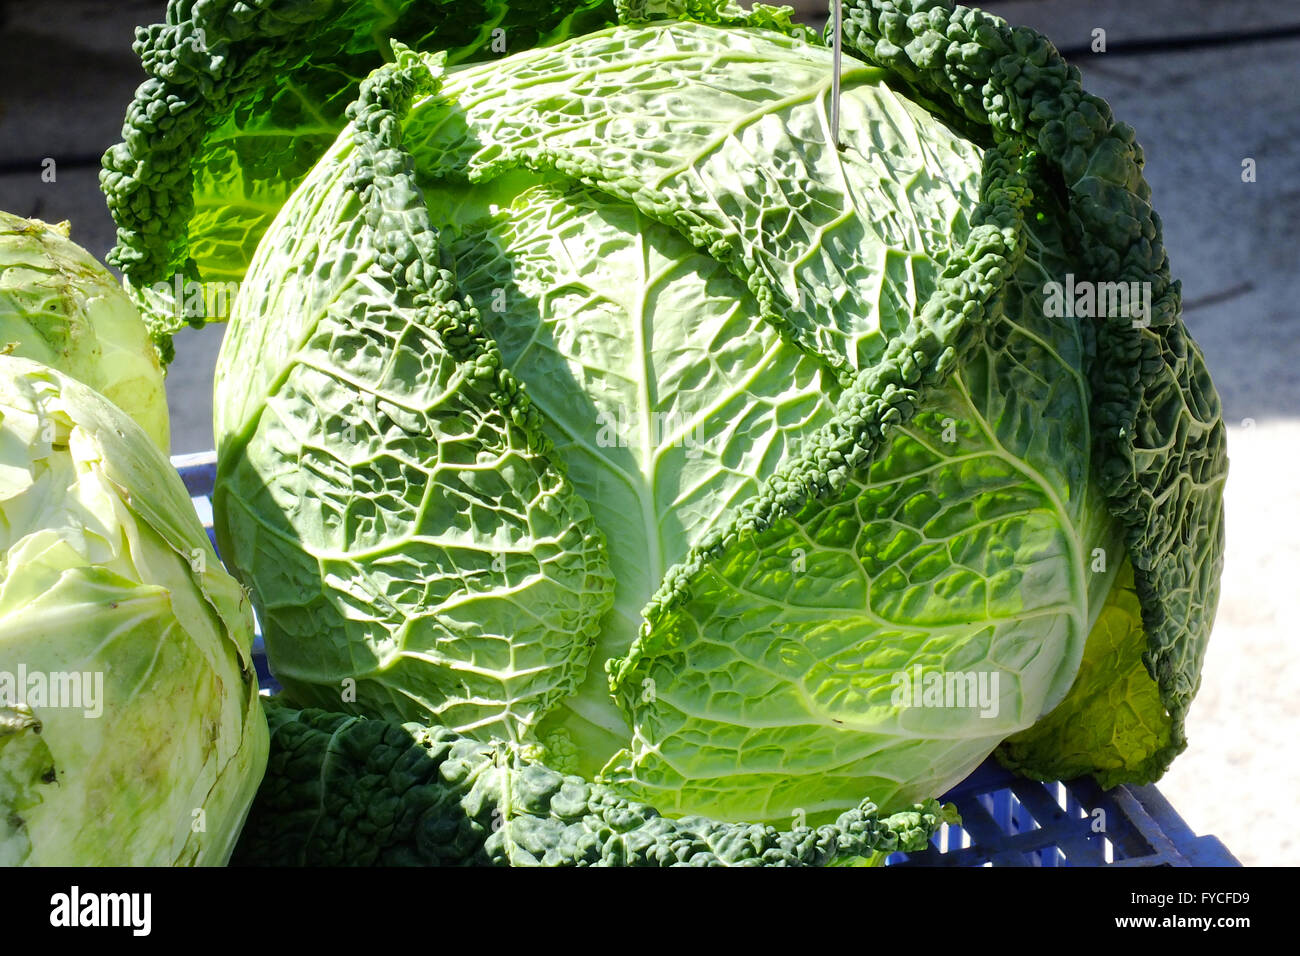 GREEN CABBAGE Stock Photo